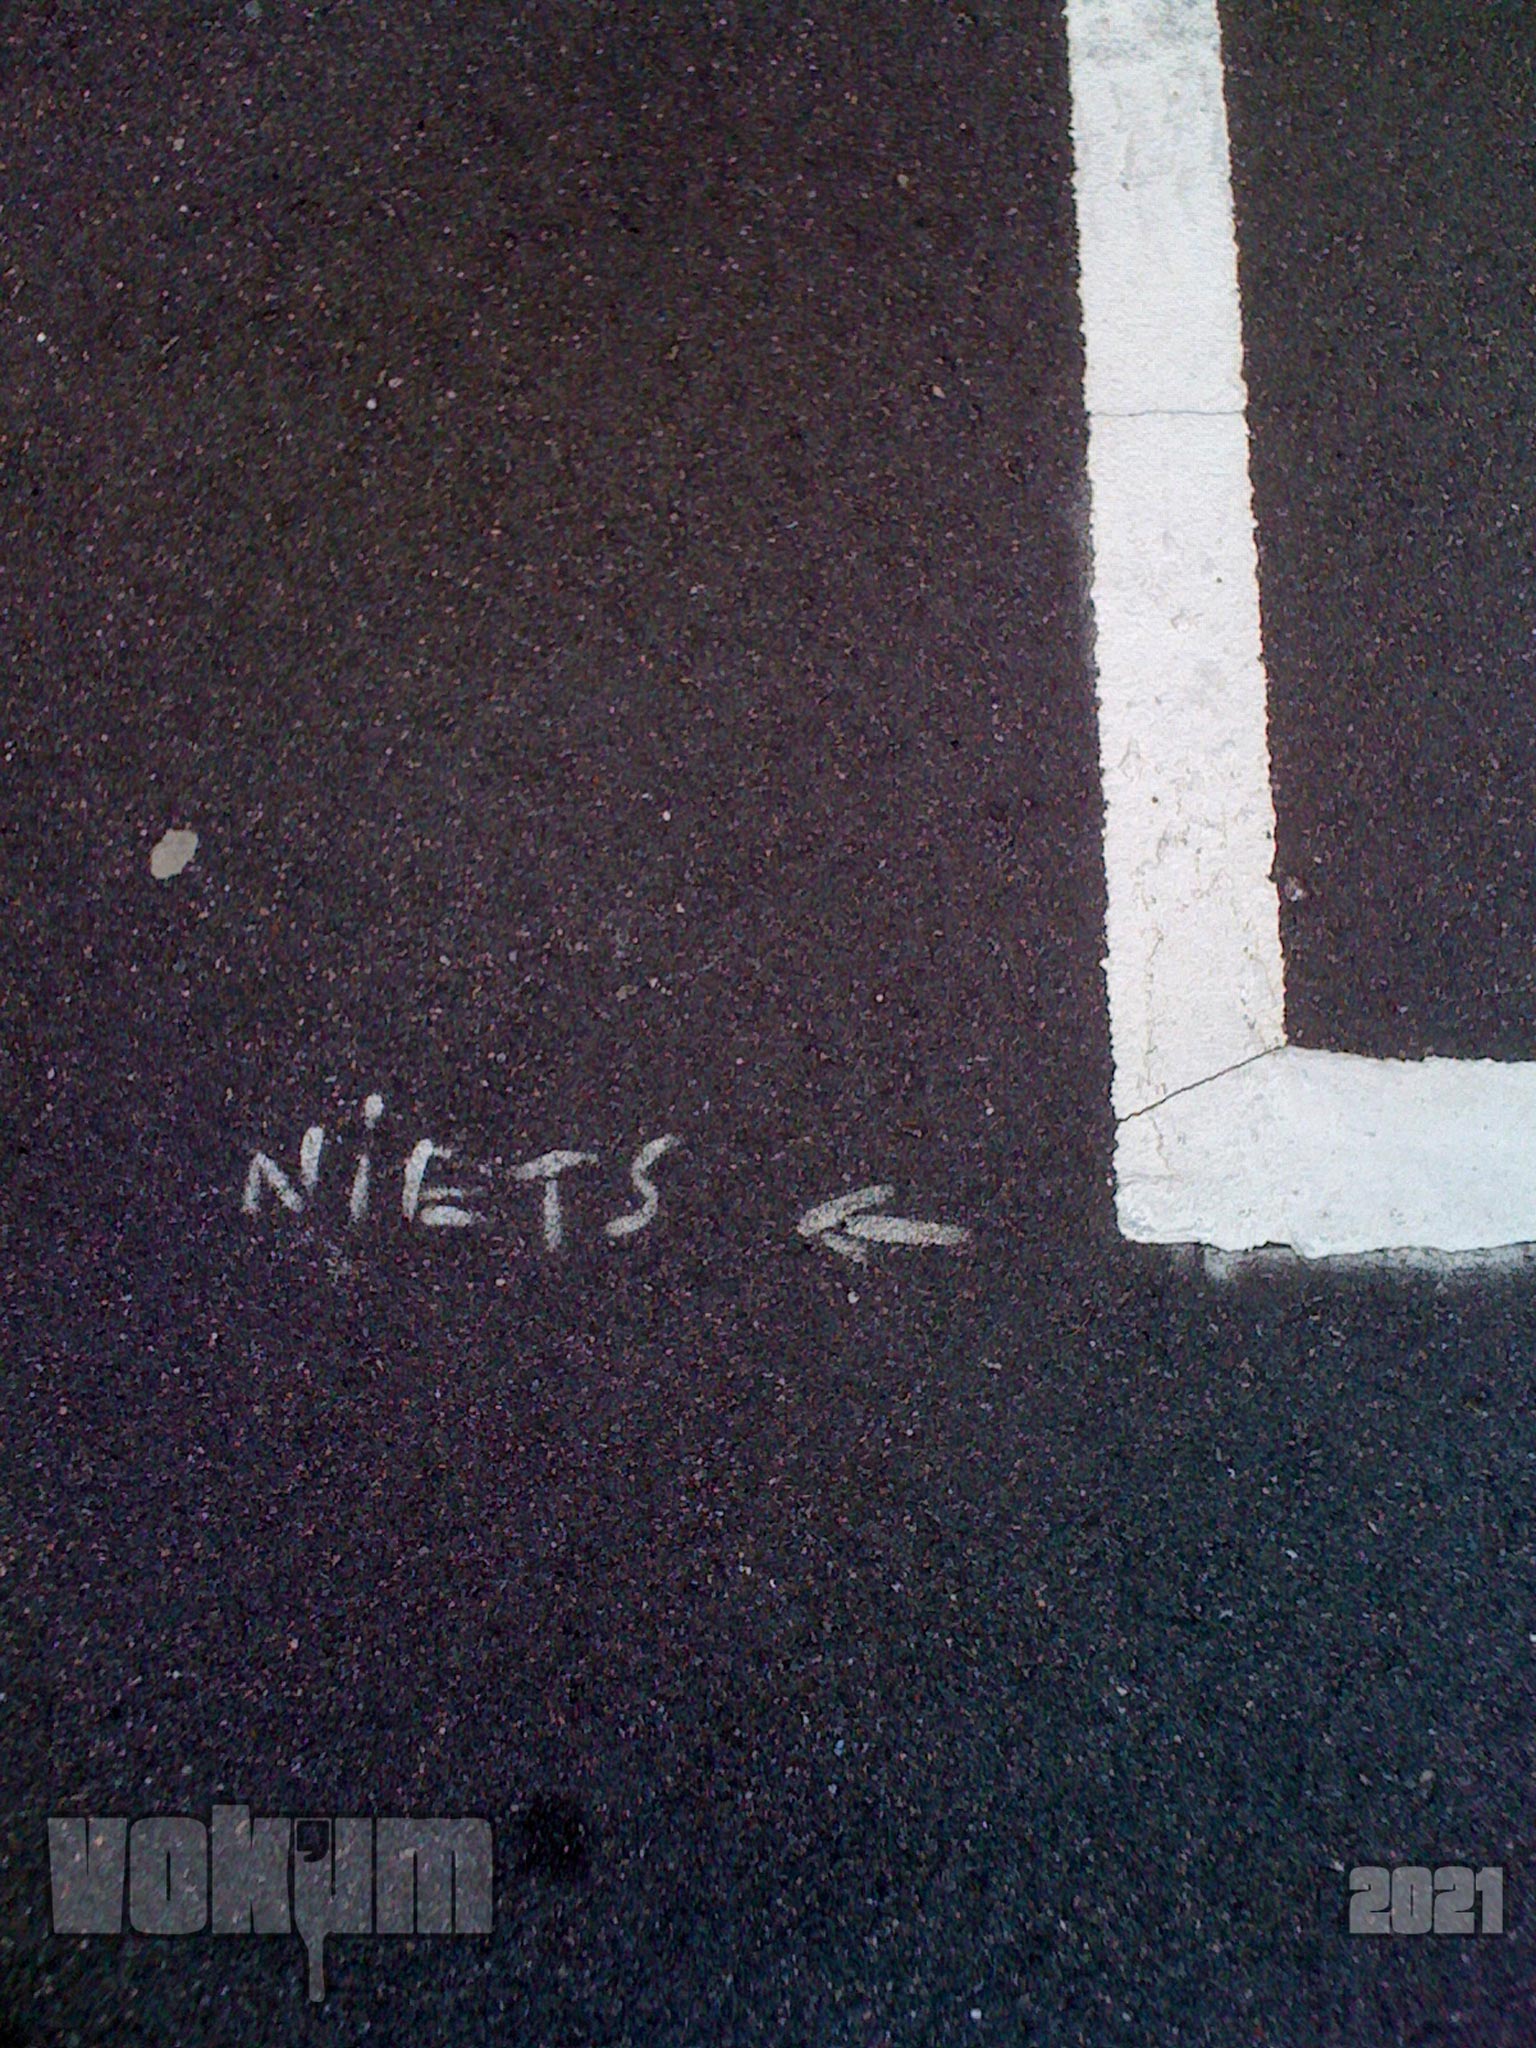 The word 'niets' (nothing in Dutch) written on the tarmac. And an arrow pointing to the word and away from the outline of a parking spot.